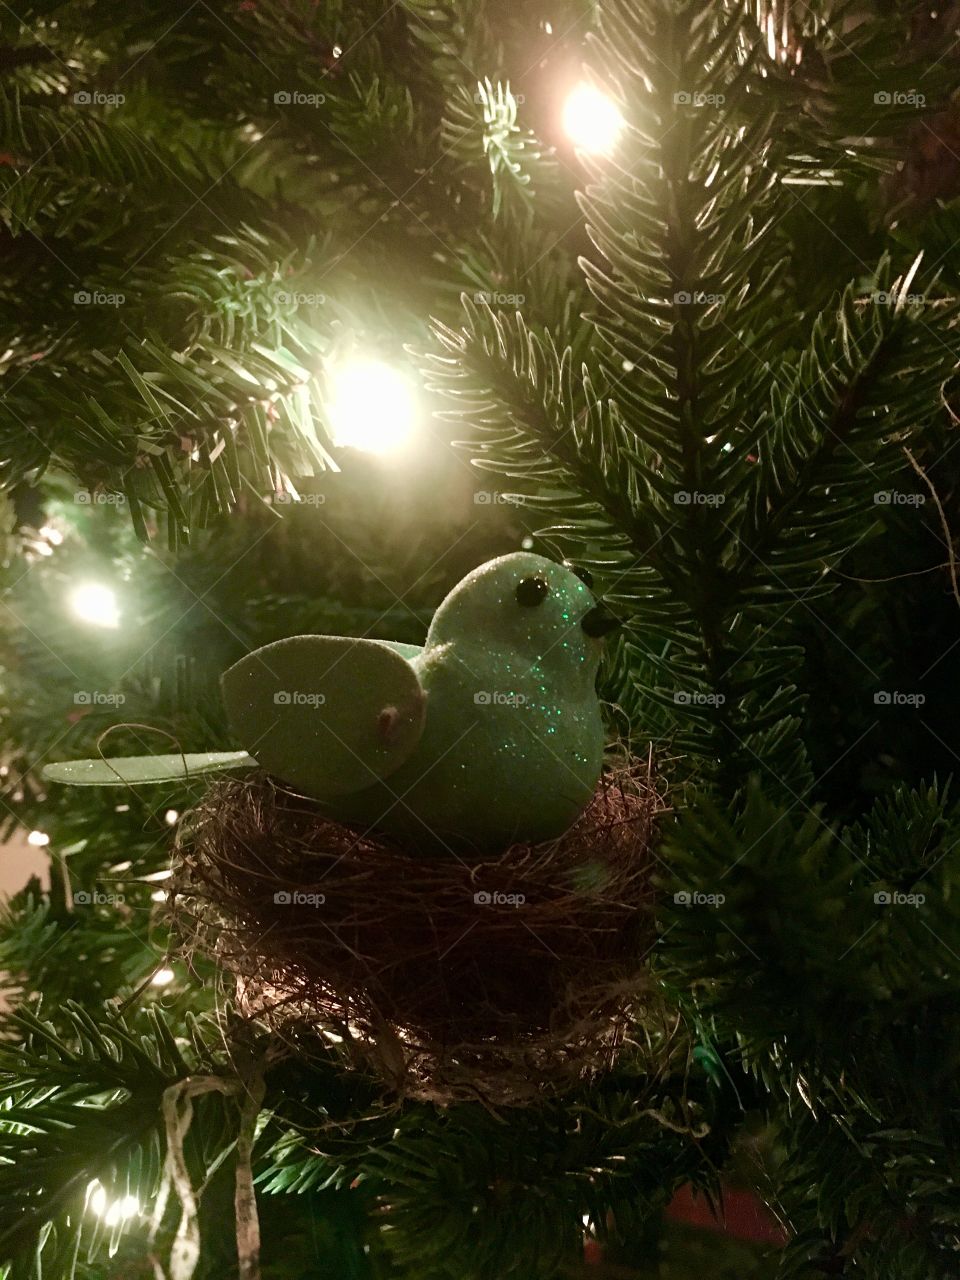 Making use of a nest we found. Happy holidays folks!